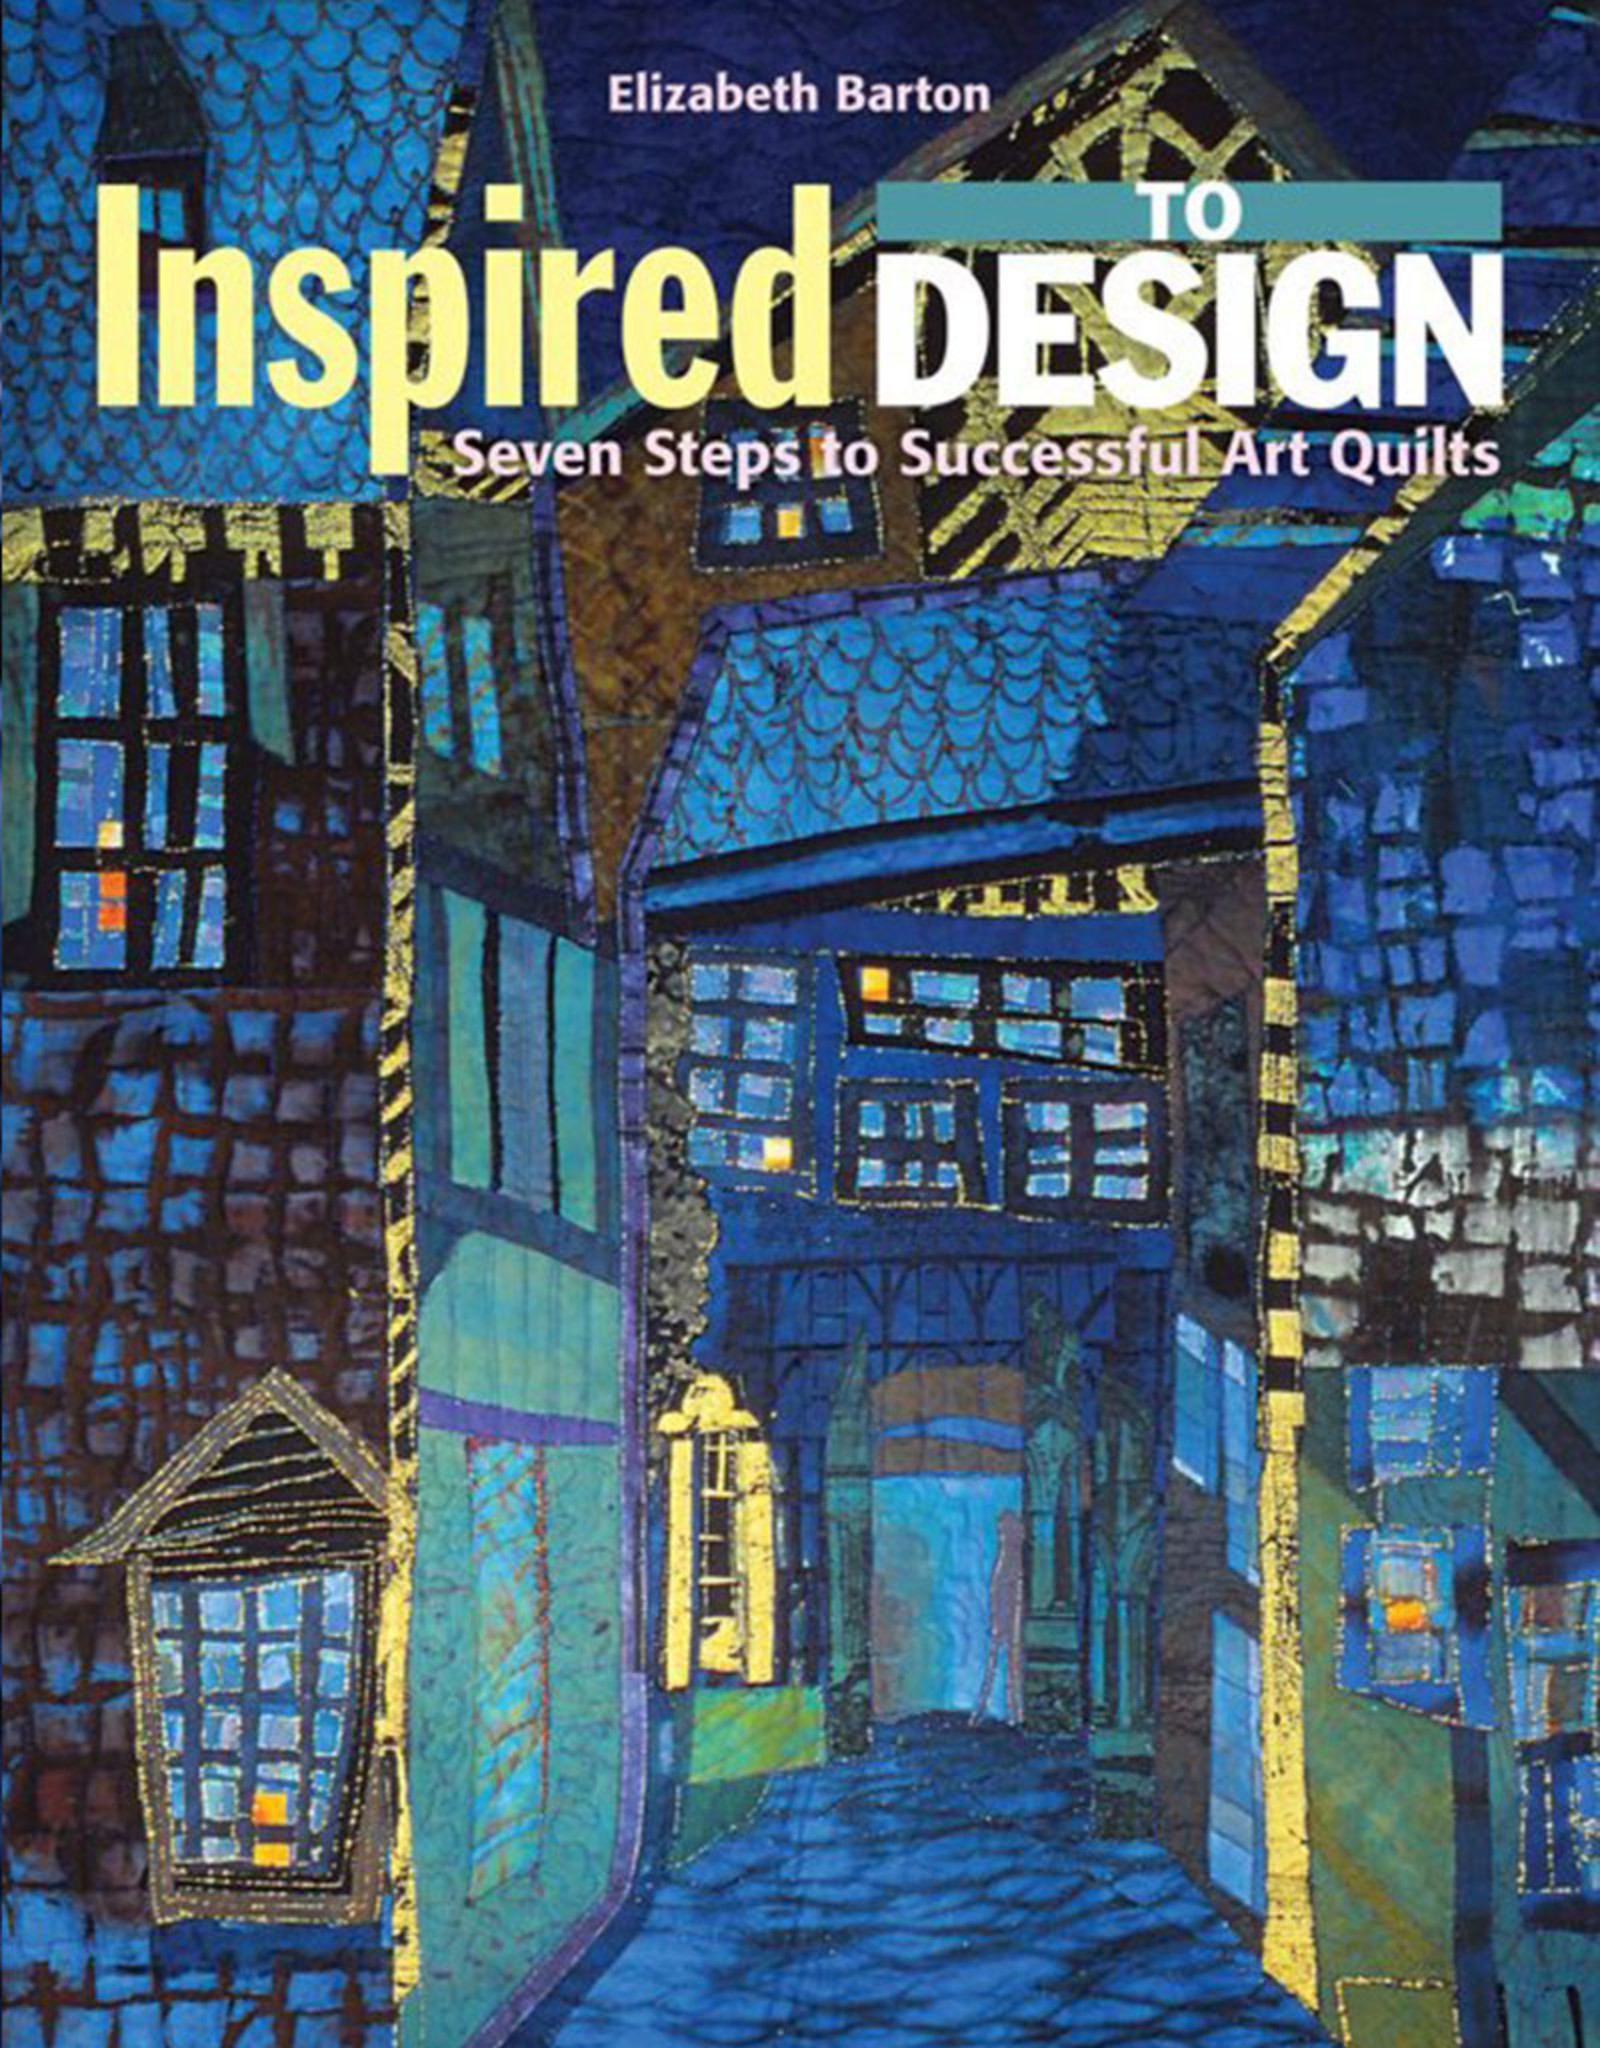 Inspired to Design Art Quilts by Elizabeth Barton